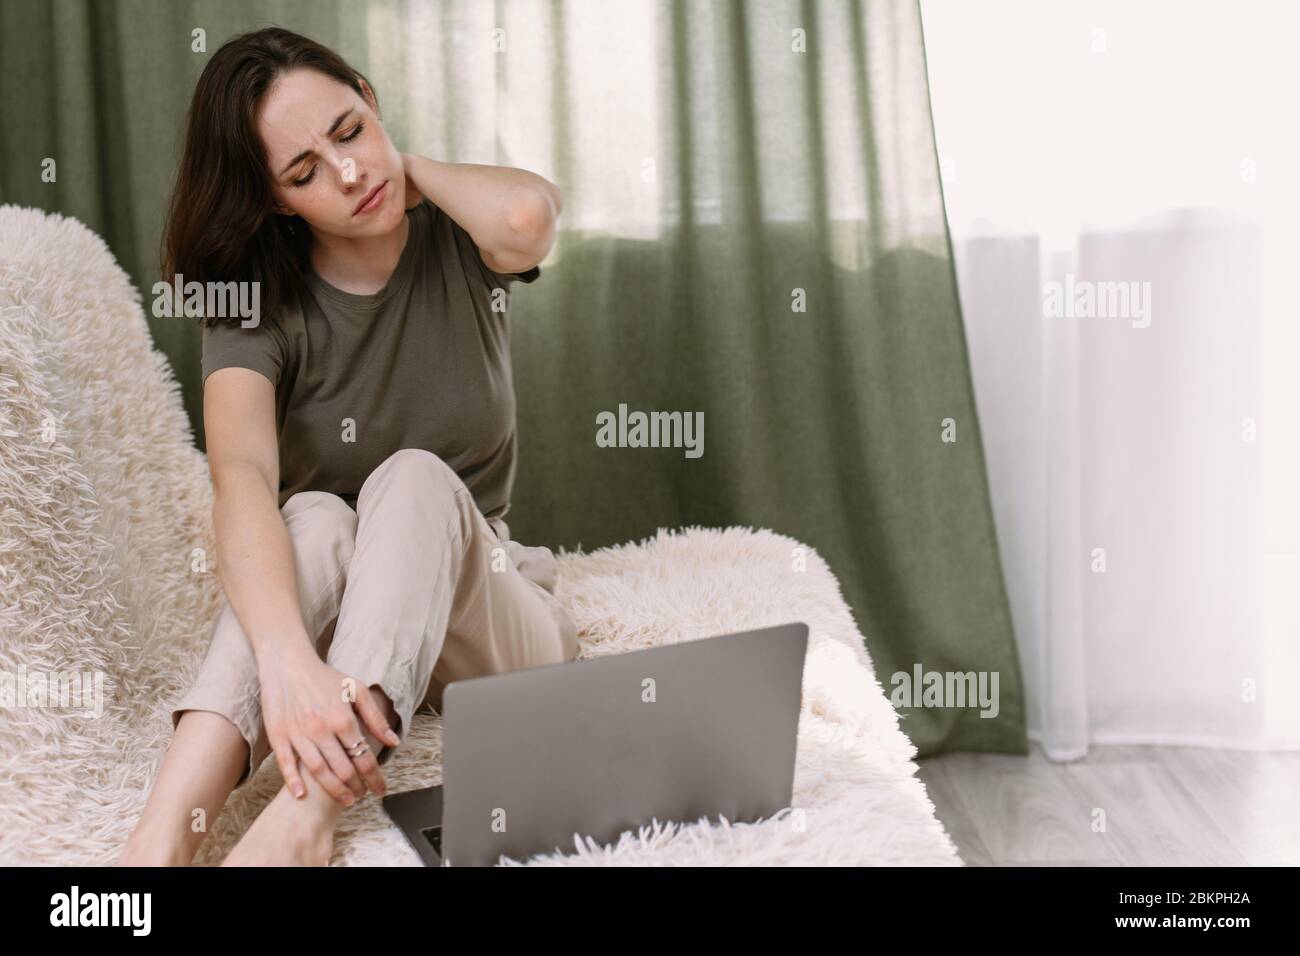 A business woman suffering from pain in neck, stretching up. Tired woman massaging rubbing stiff sore neck tensed muscles fatigue from computer work. Freelancer tired of working at home on the couch. Stock Photo